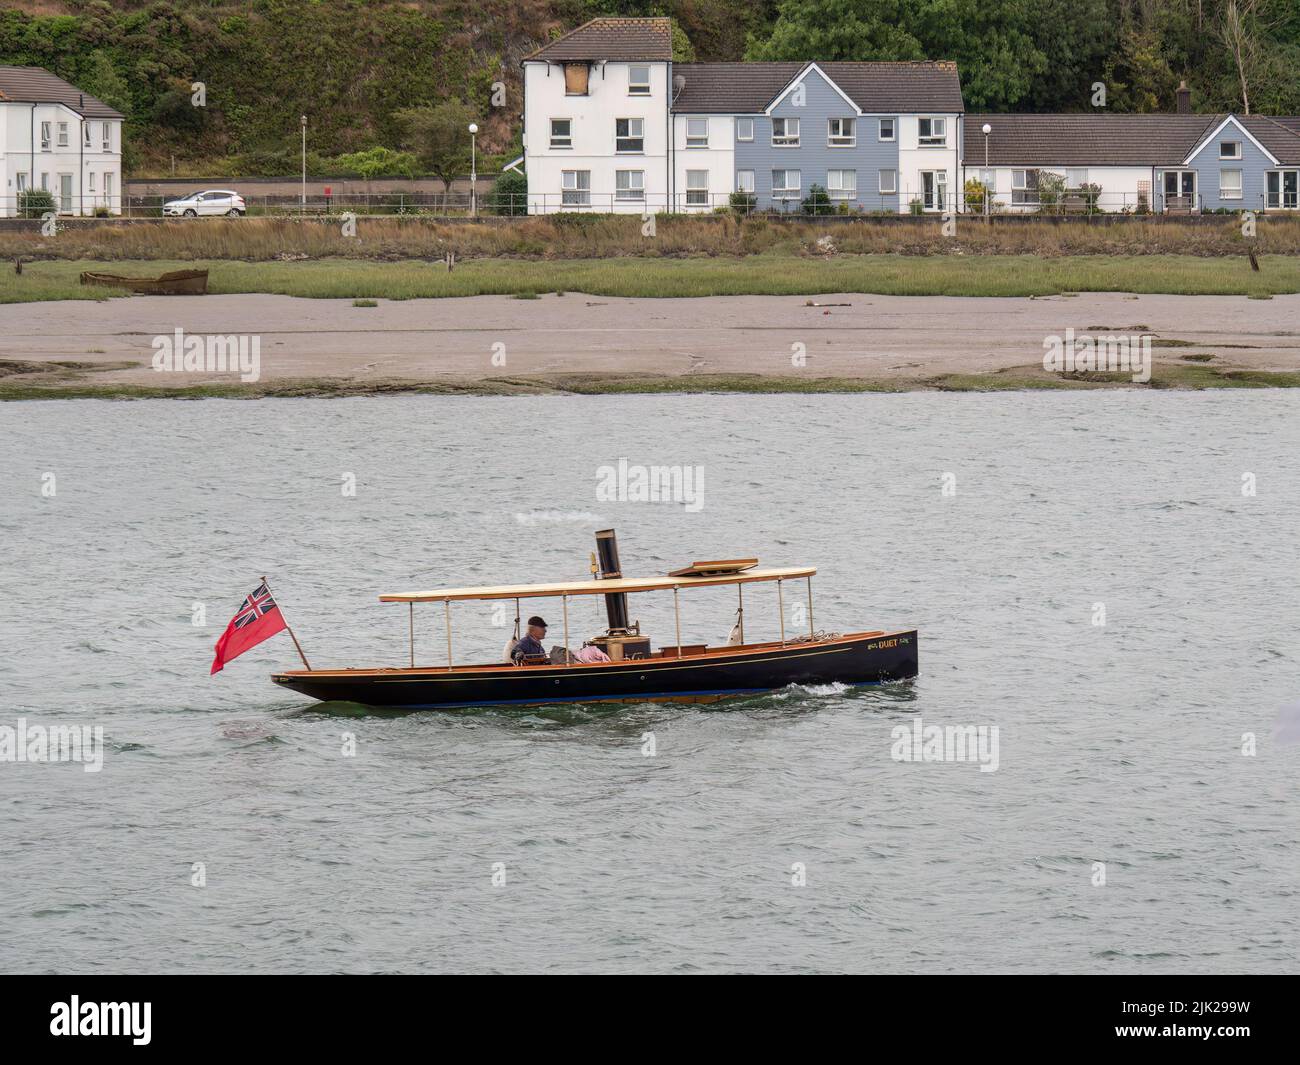 BIDEFORD, DEVON, ENGLAND - JULY 24 2022: Old steamboat on the River Torridge during the annual Water Festival on the River Torridge in Bideford. Stock Photo